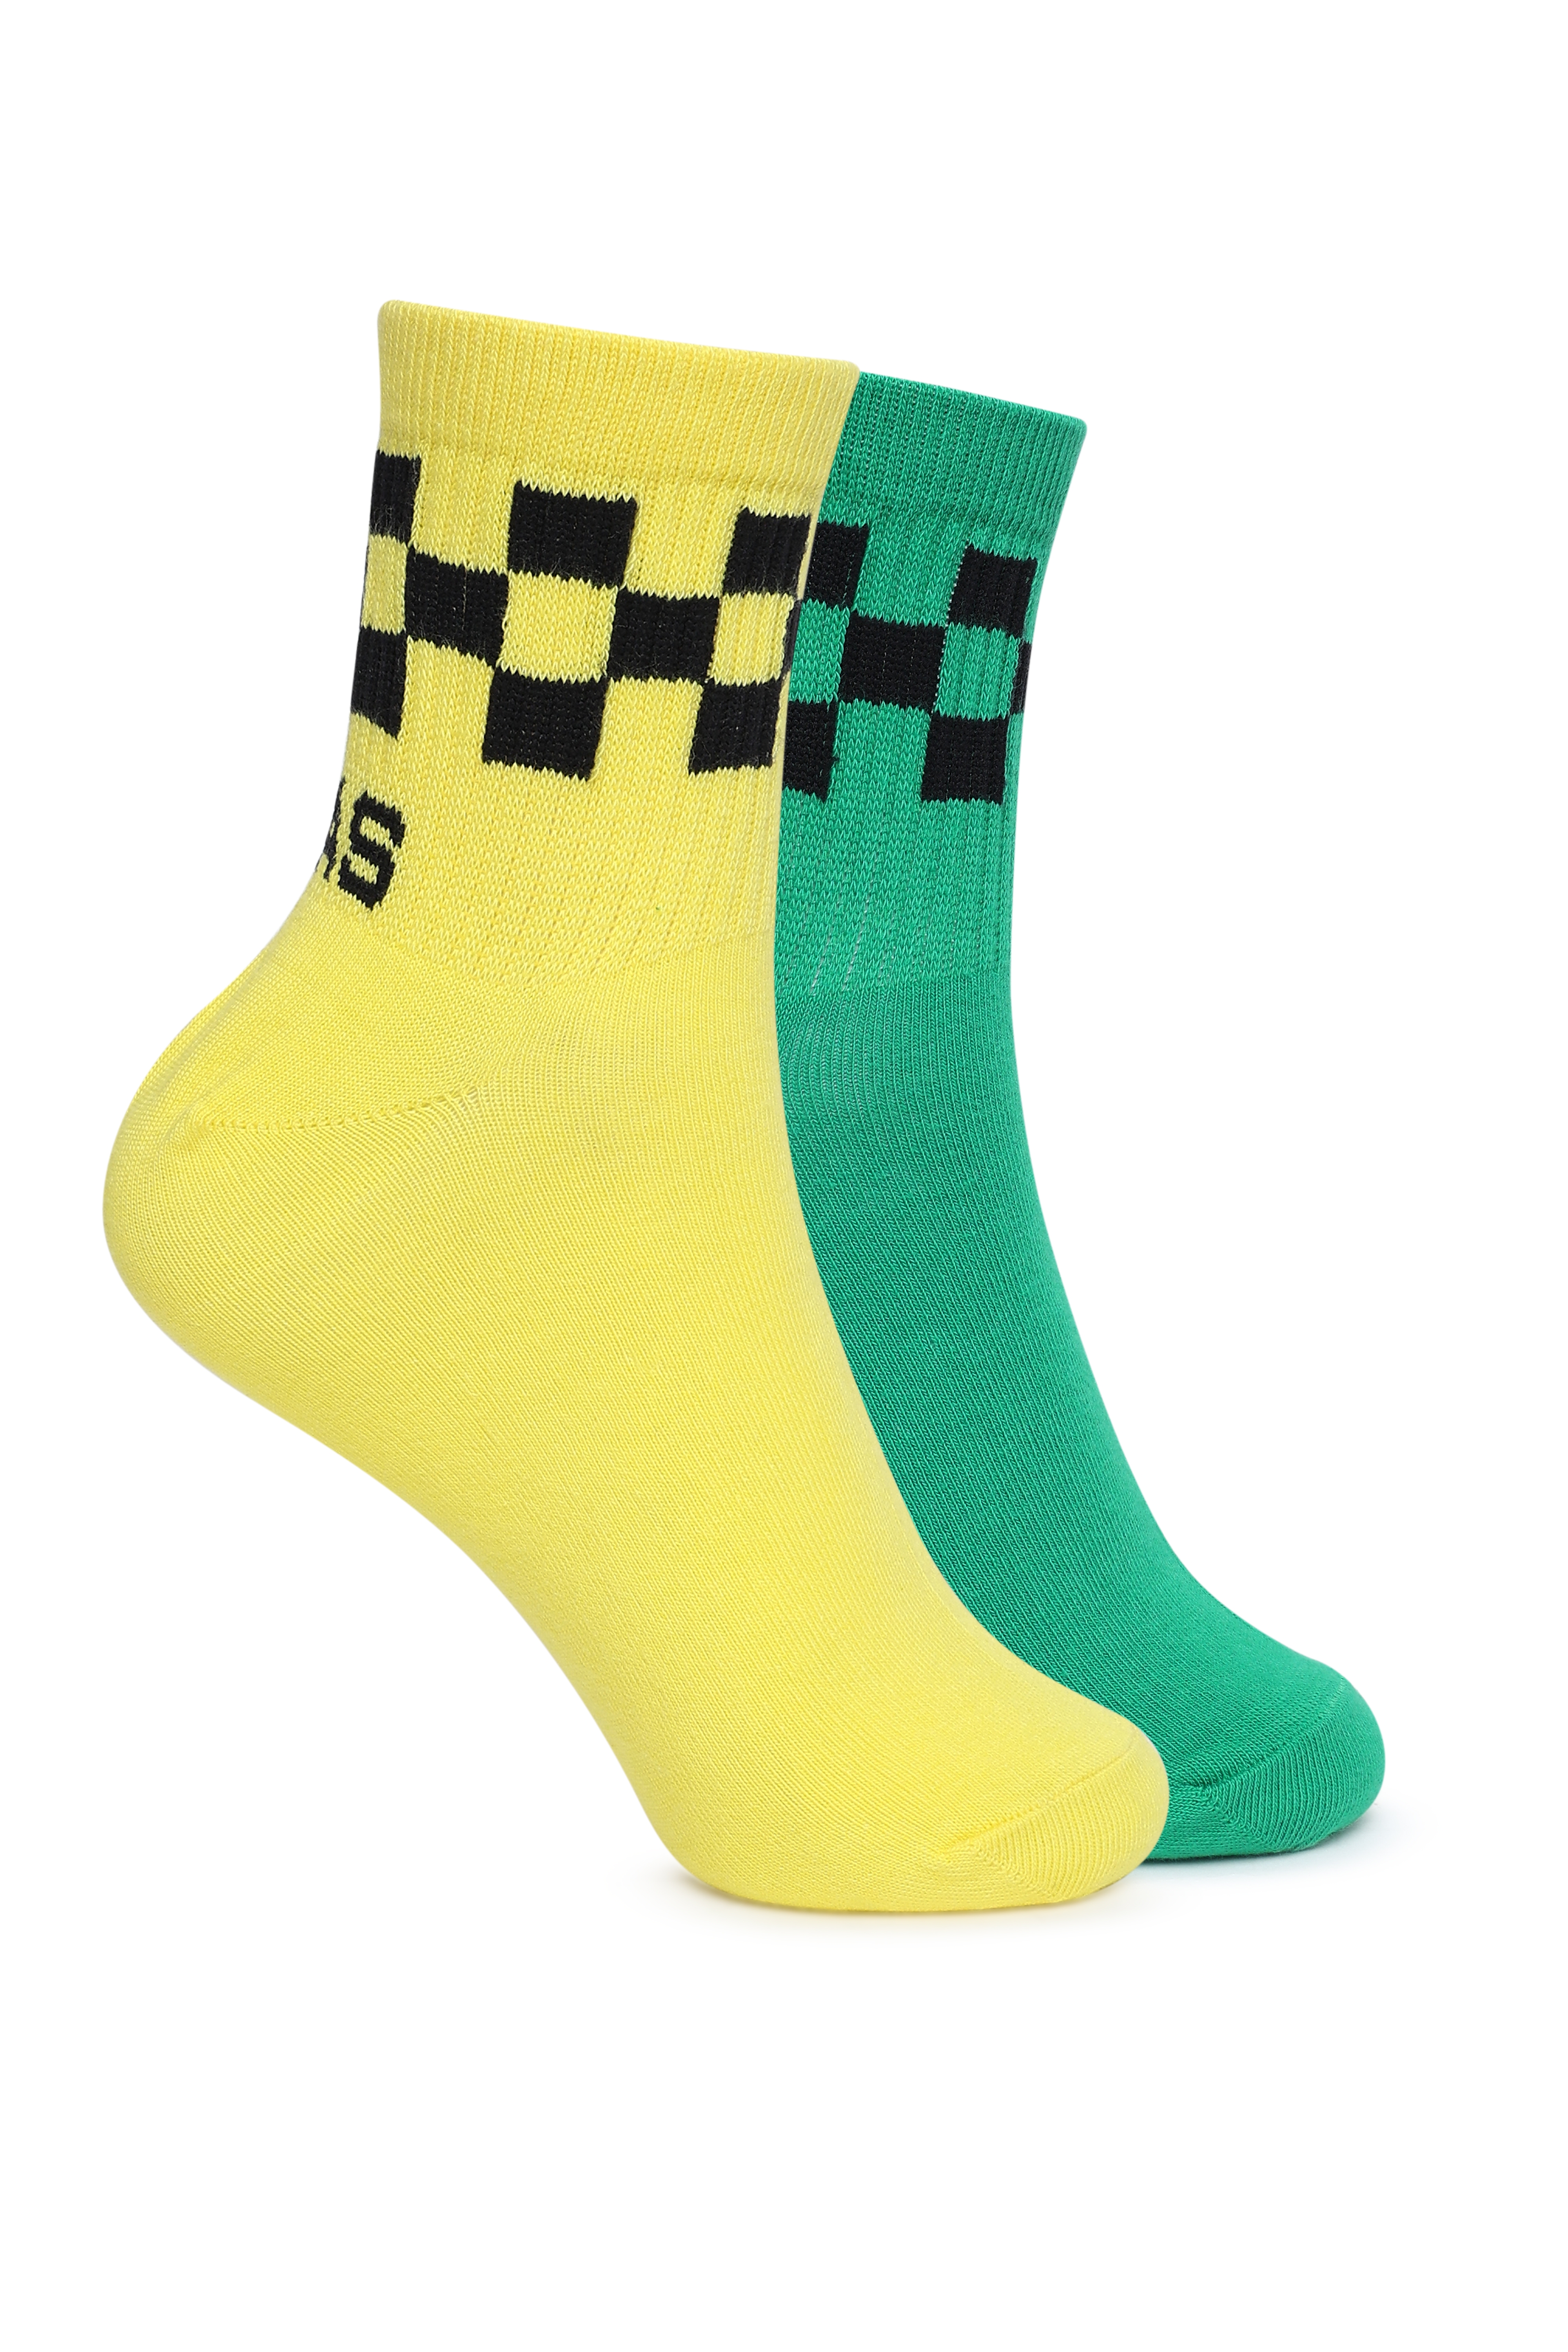 RETO IN Yellow & Green Check Socks (Pack of 2)